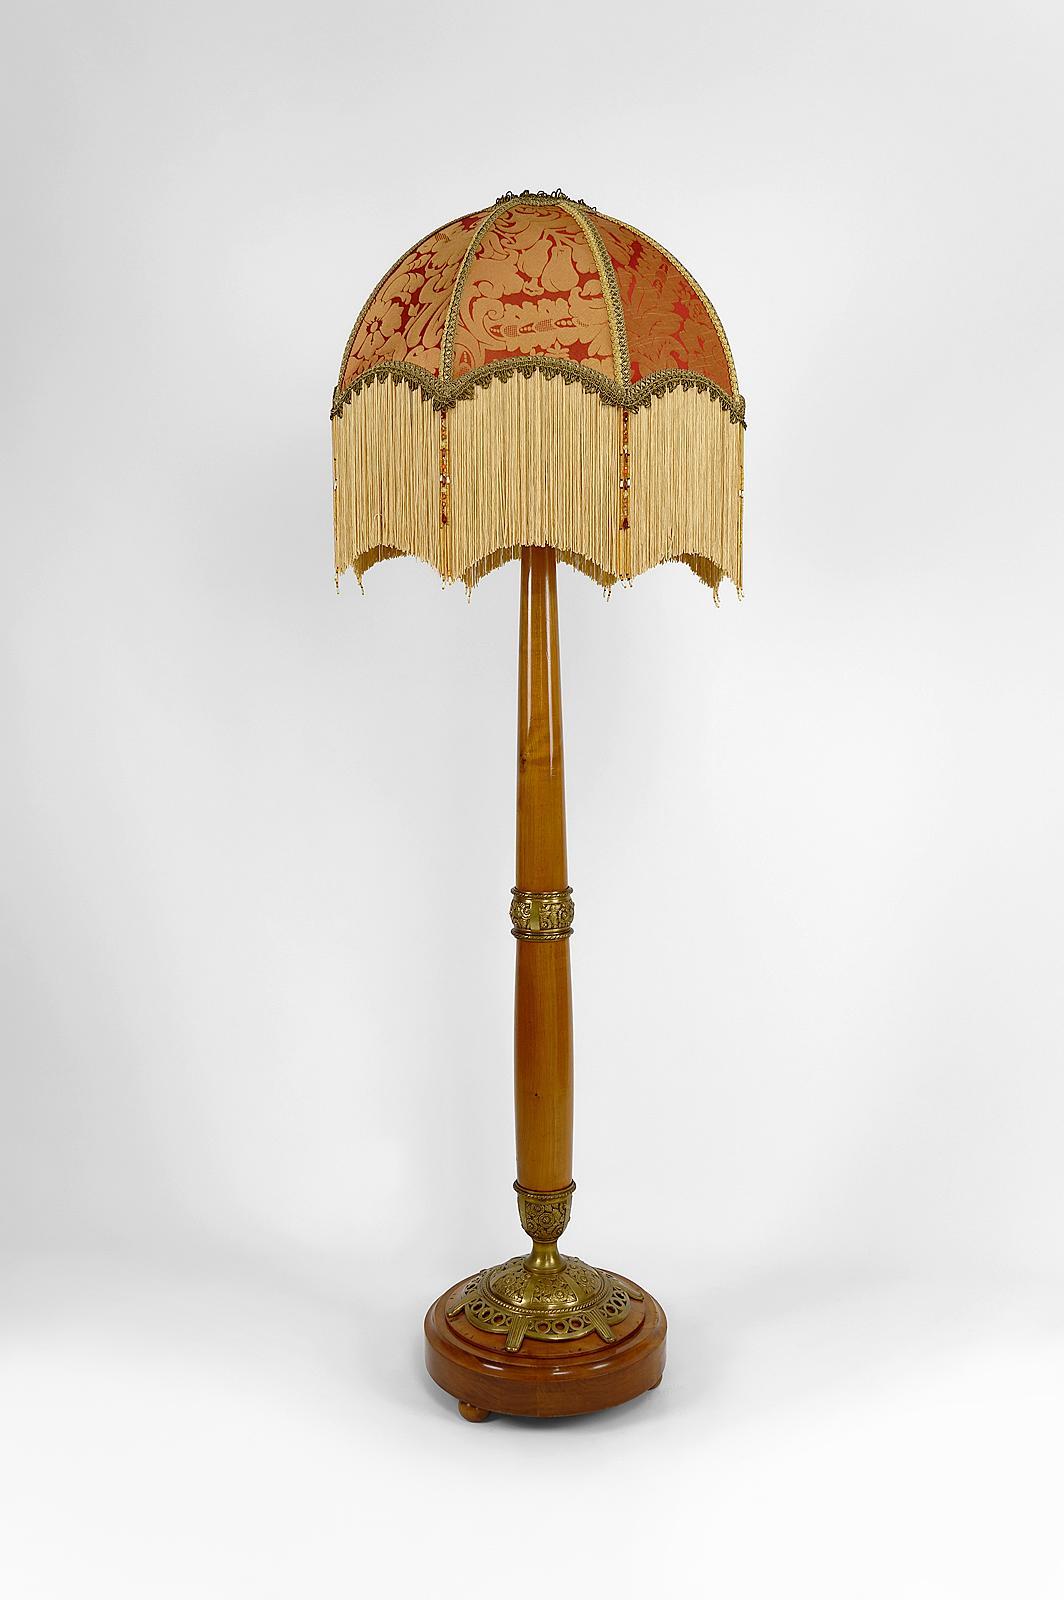 French Art Nouveau Floor Lamp in Cherry Wood by Paul Follot, France, circa 1920 For Sale